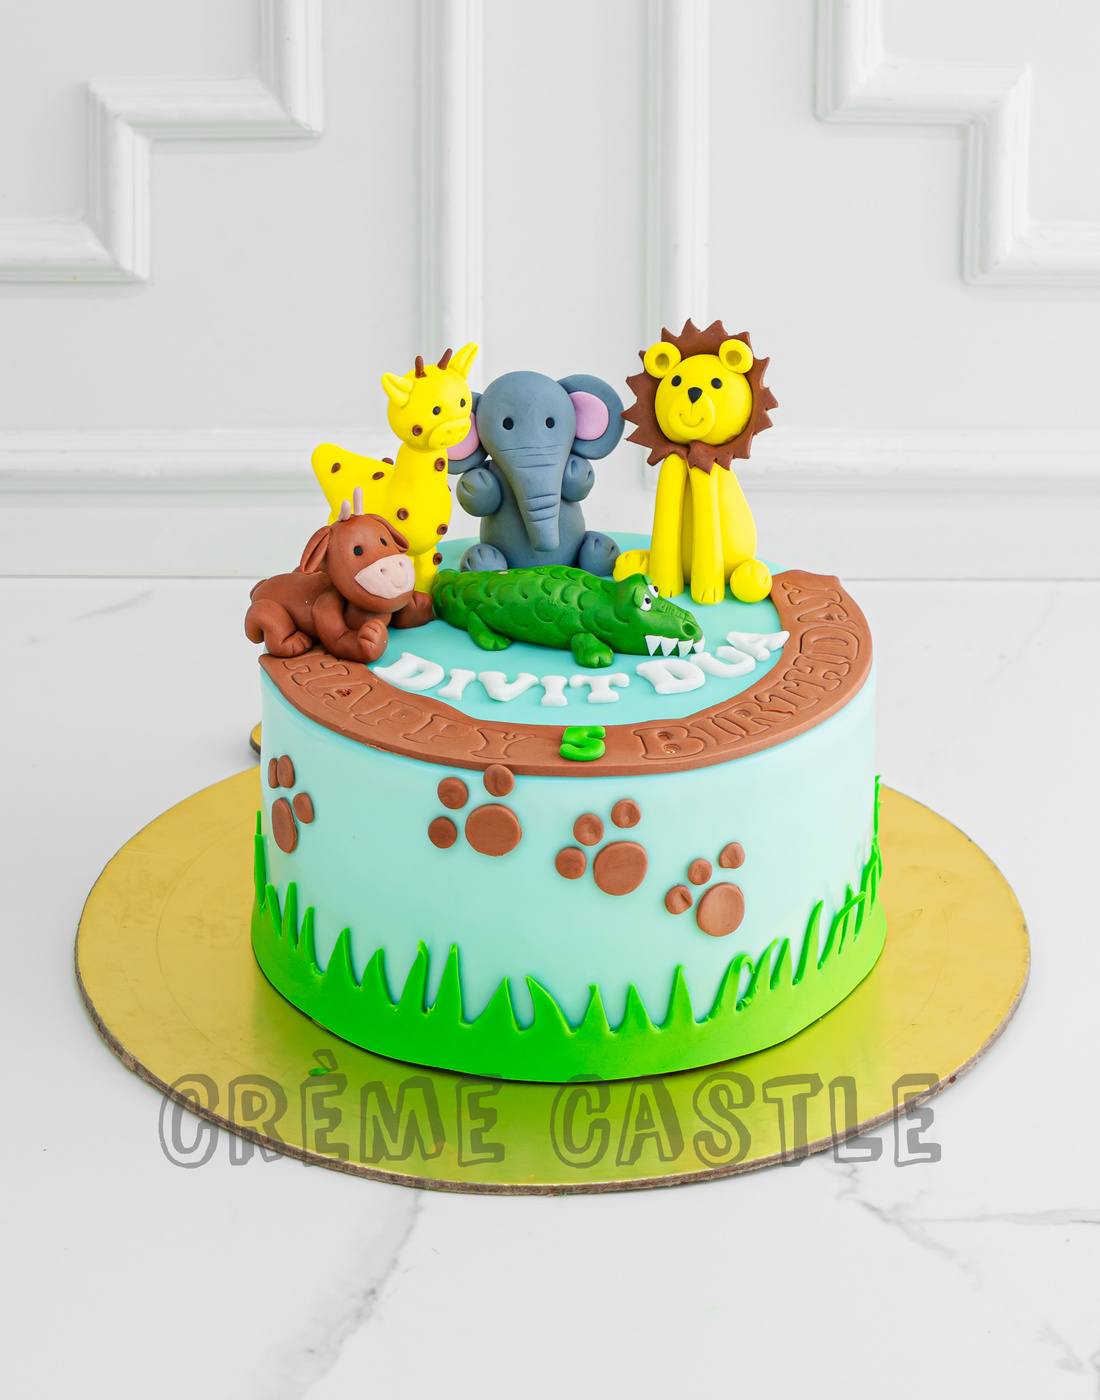 Hippo - Decorated Cake by Putty Cakes - CakesDecor